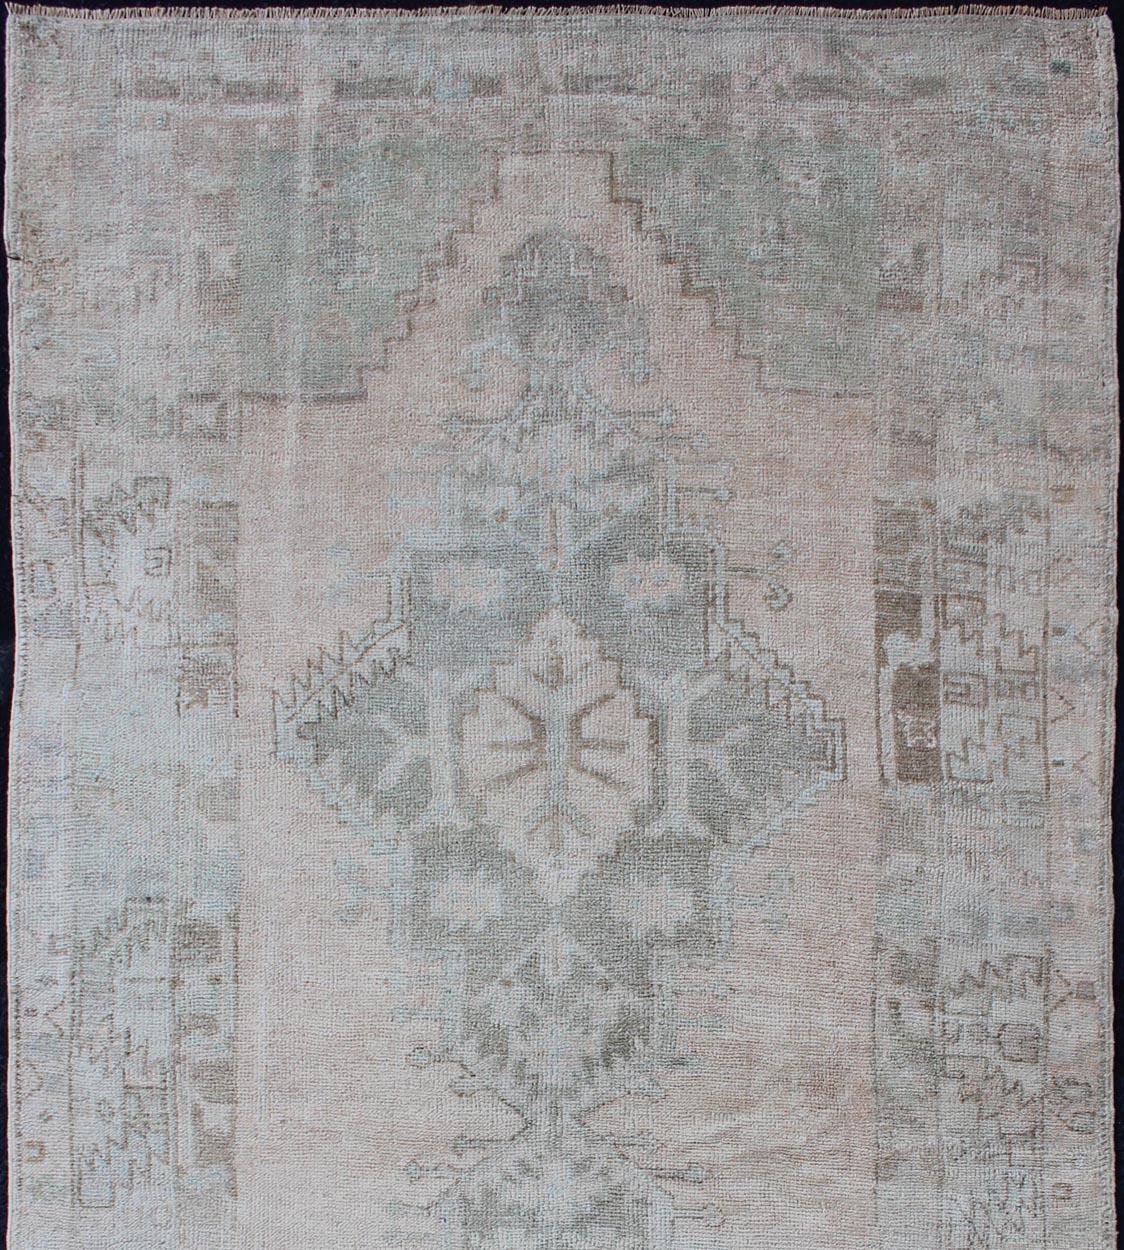 Vintage Oushak rug from Turkey with Medallion Design, Keivan Woven Arts / rug EN-179551, country of origin / type: Turkey / Oushak, circa 1940.

This vintage Turkish Oushak rug features a faint, etched medallion design, which is composed of